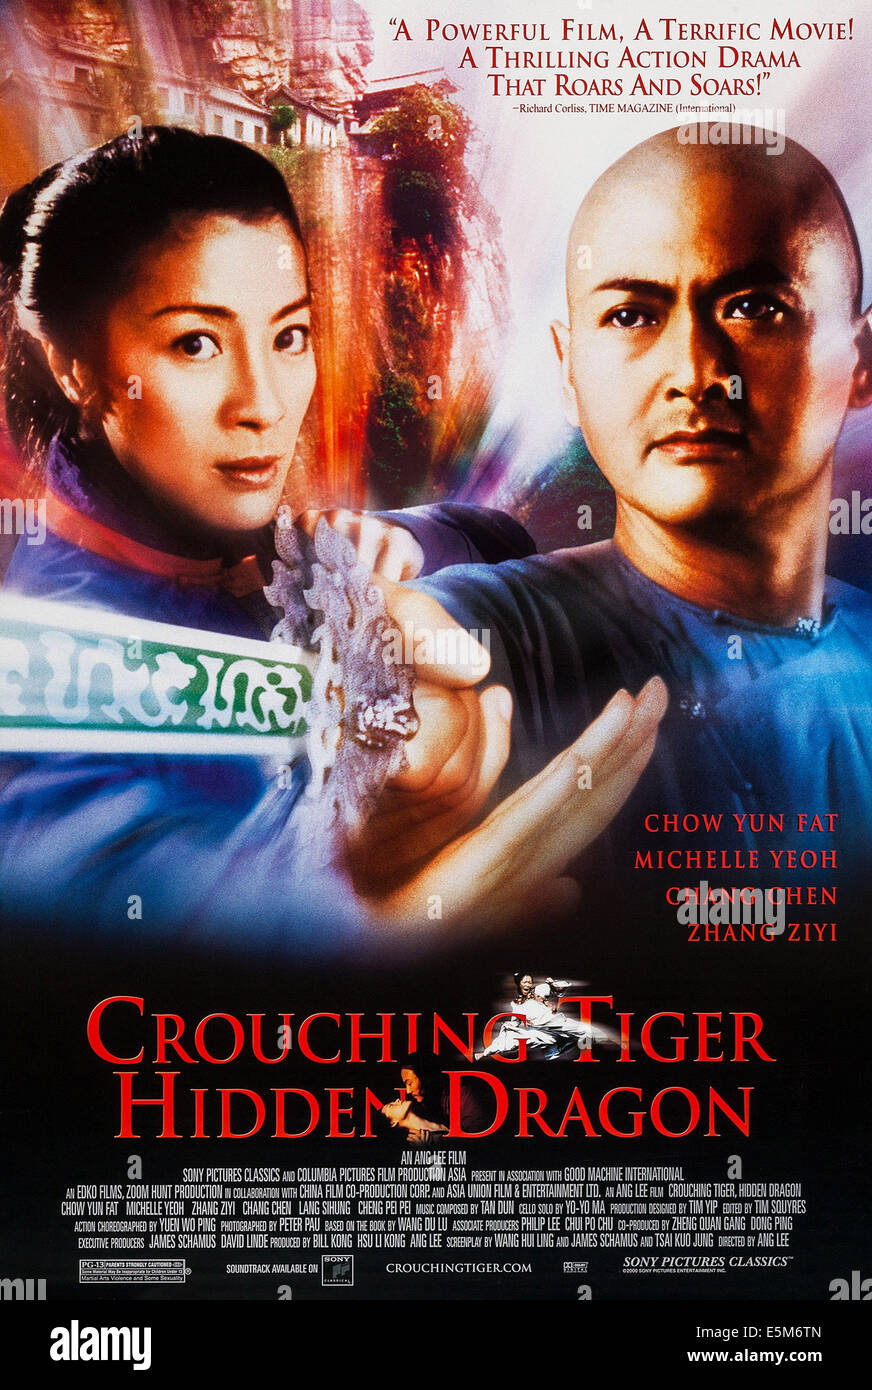 CROUCHING TIGER, HIDDEN DRAGON, US poster art, from left: Michelle Yeoh, Chow Yun Fat, 2000. ©Columbia Pictures/ Courtesy: Stock Photo